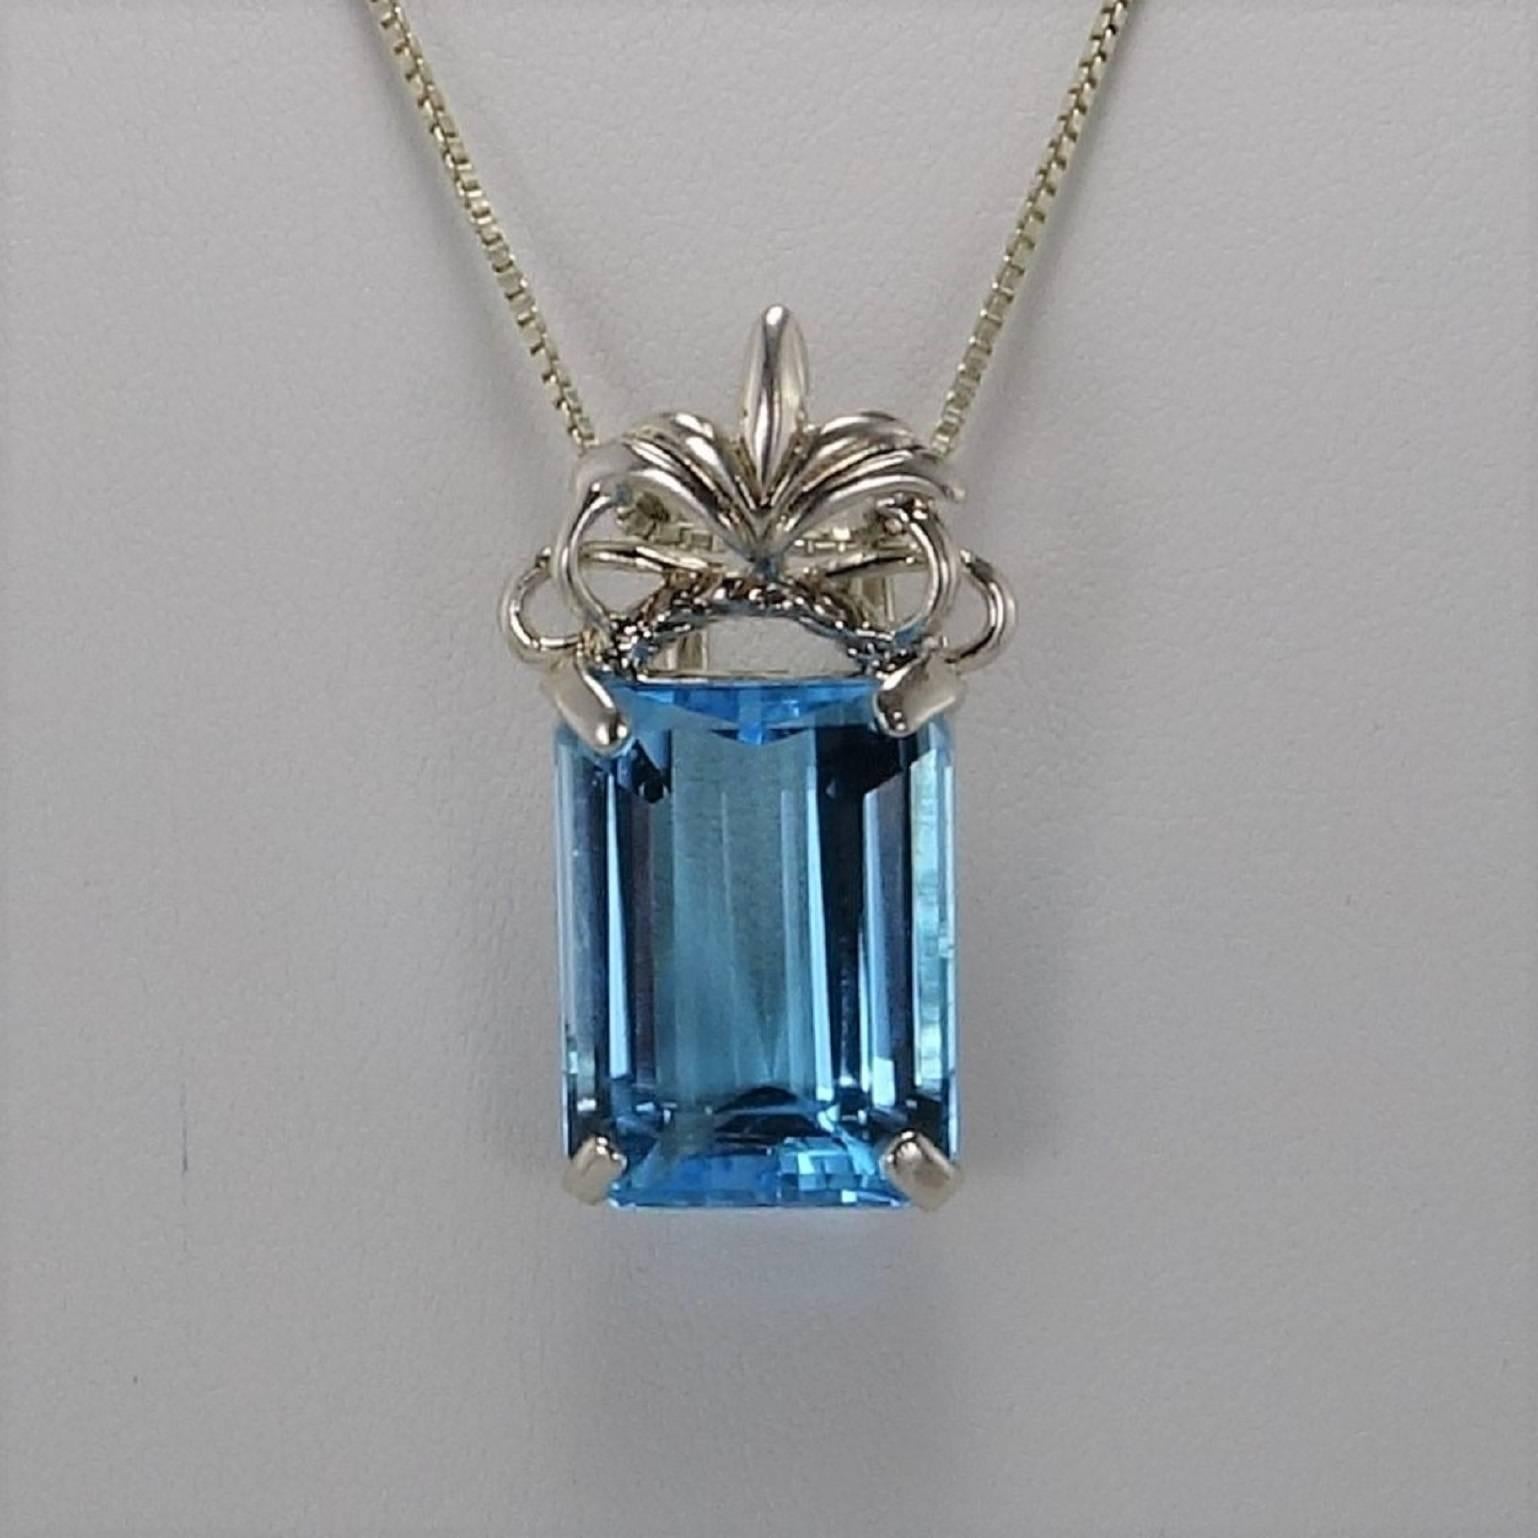 Sparkling Sky Blue Topaz of 26.95 carats set in a Pendant of ornate Sterling Silver. This Blue Topaz is Emerald Cut and brillant. The Emerald Cut is an interesting contrast to the Scrolly Crest atop the gemstone. The overall length is 1 3/8 inches.